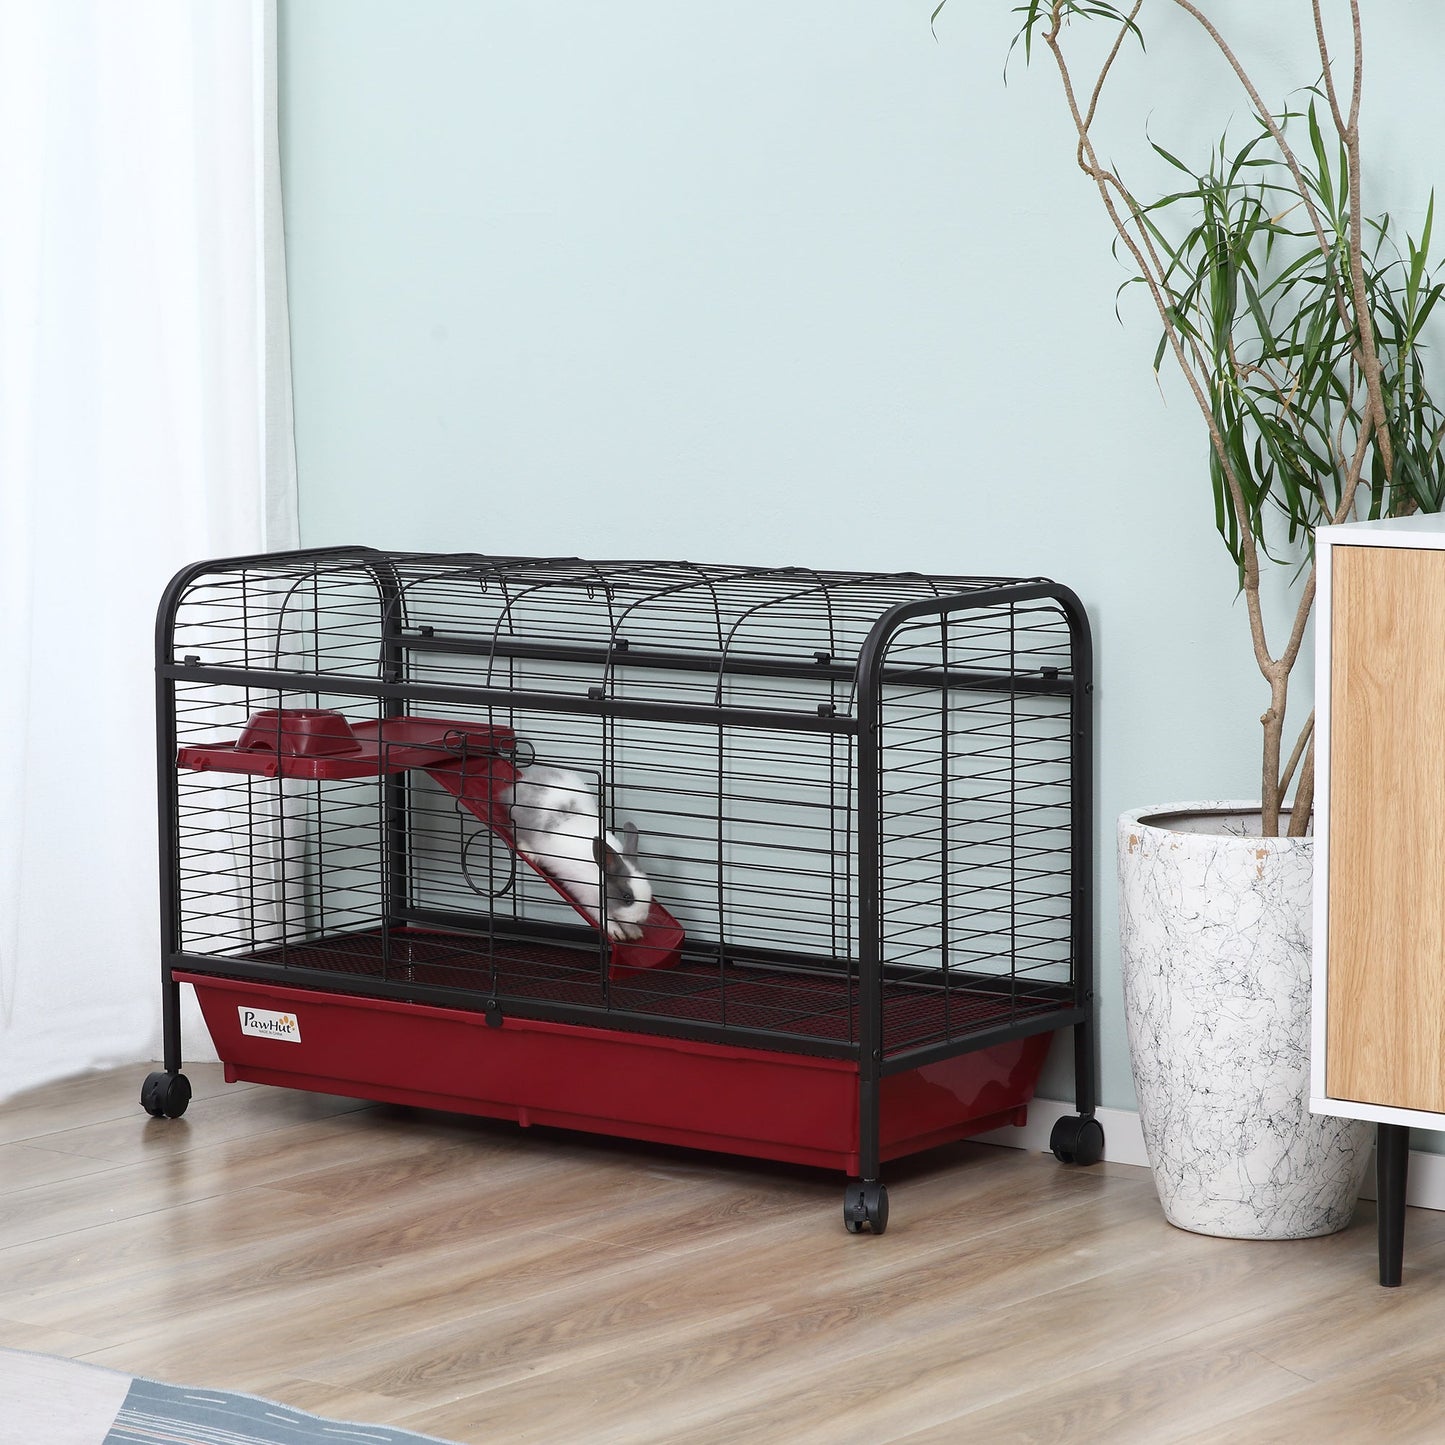 -PawHut 41"L Small Animal Cage, Rabbit Guinea Pig Hutch, Ferret Pet Play House with Feeder, Rolling Wheels, Platform & Ramp, Red and Black - Outdoor Style Company